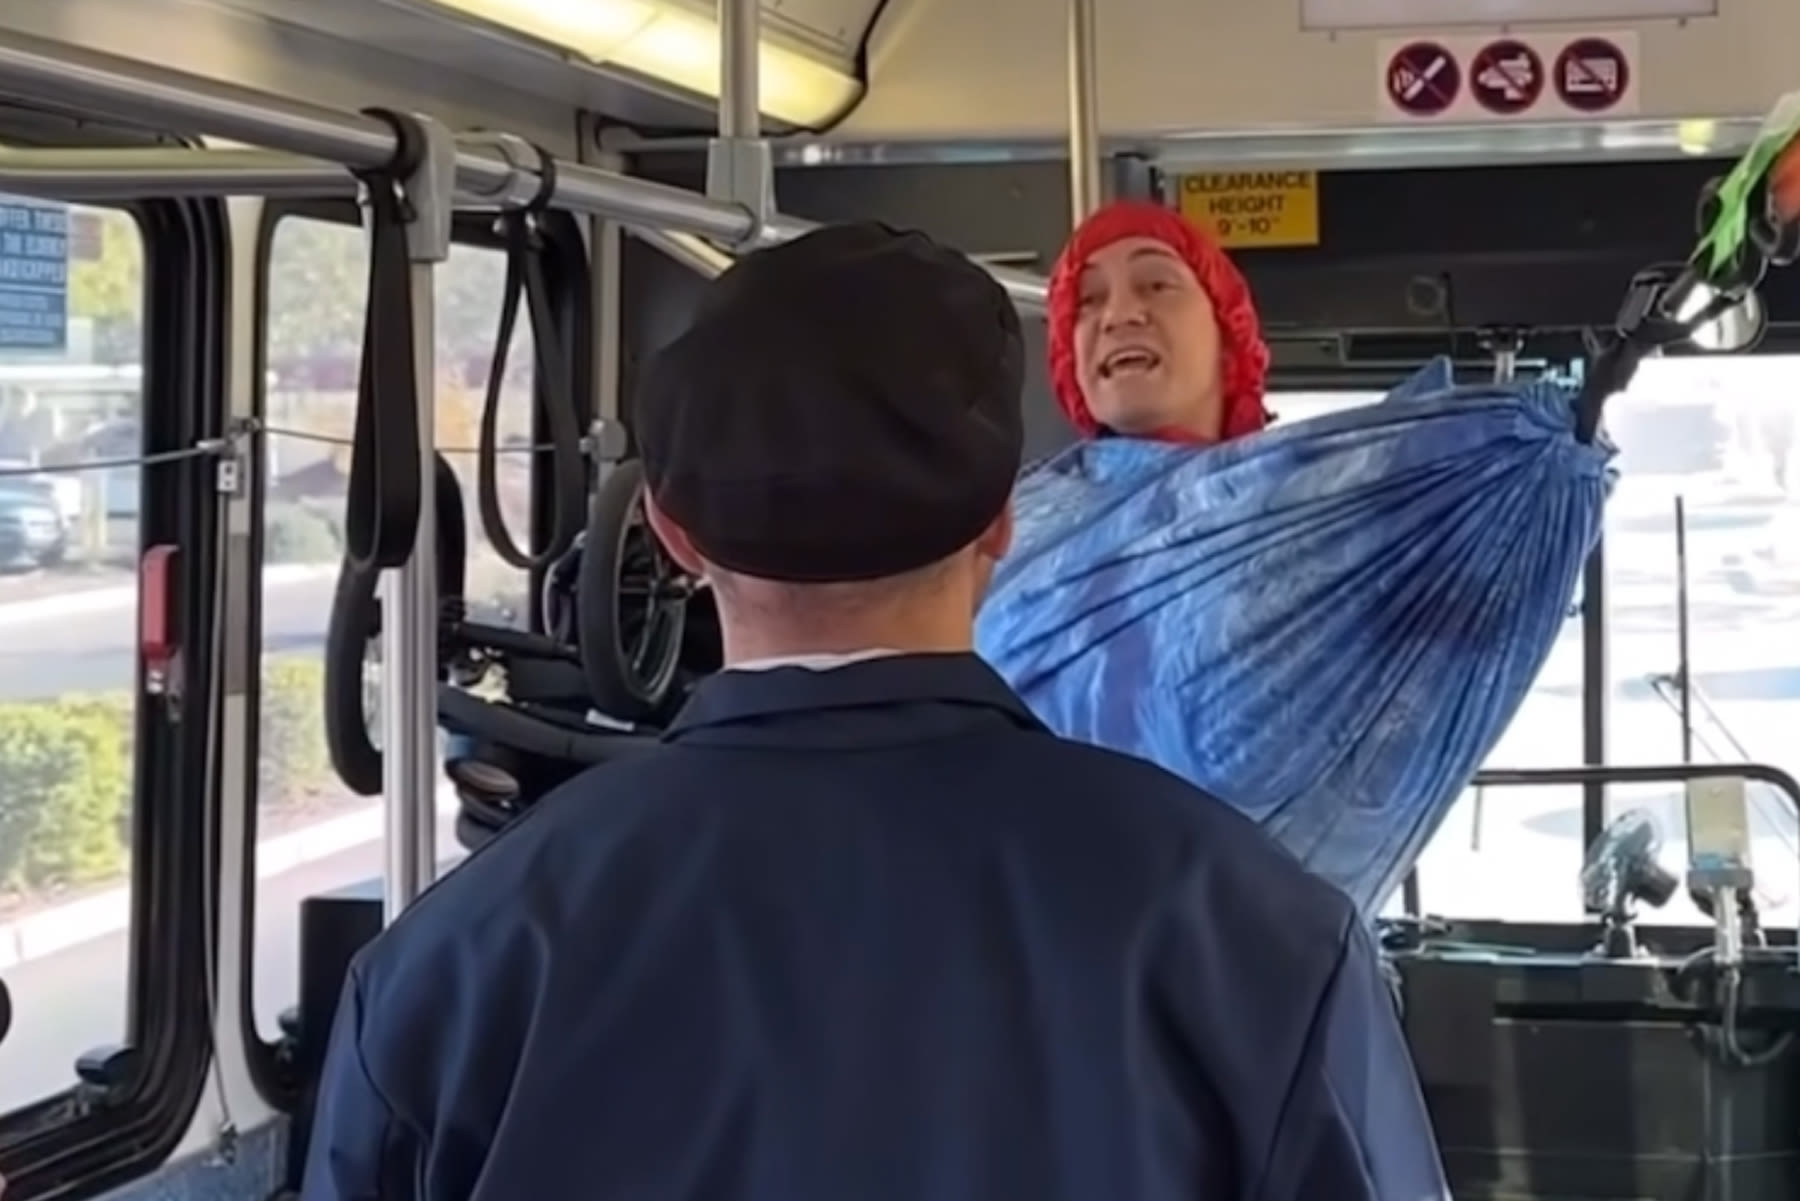 What The Viral Fake Bus Hammock TikTok Says About Staged Videos